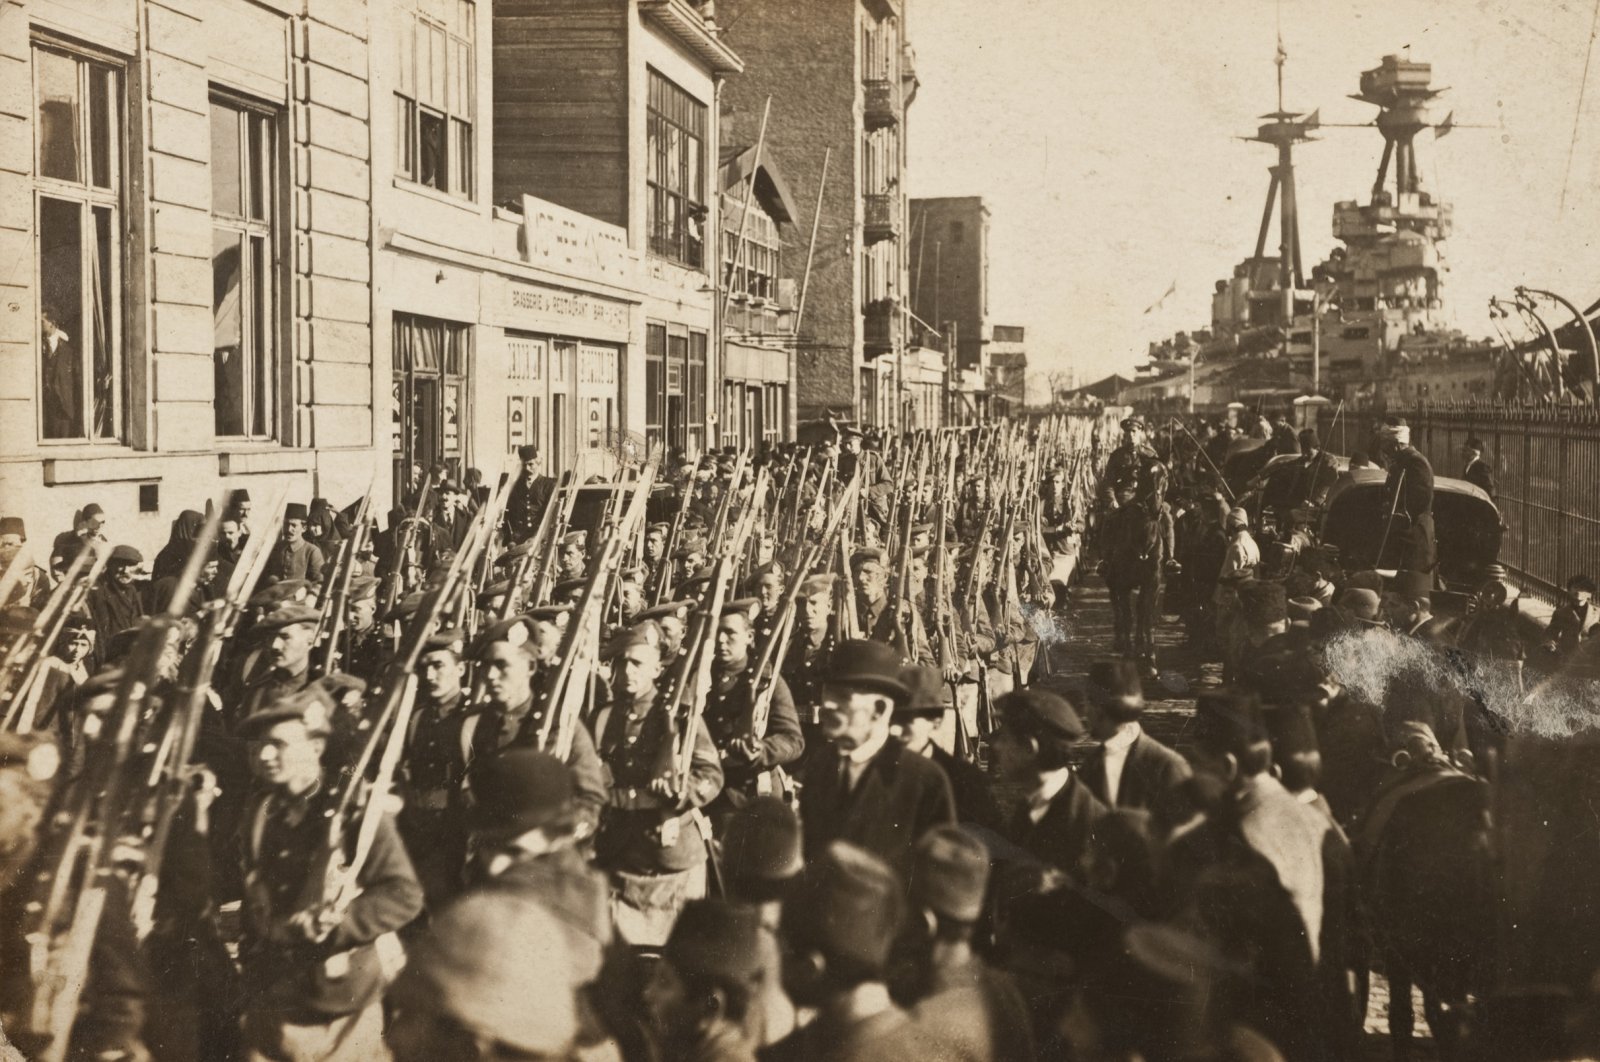 British soldiers parade in Karaköy. (Photo courtesy of Suna and İnan Kıraç Foundation Photography Collection)